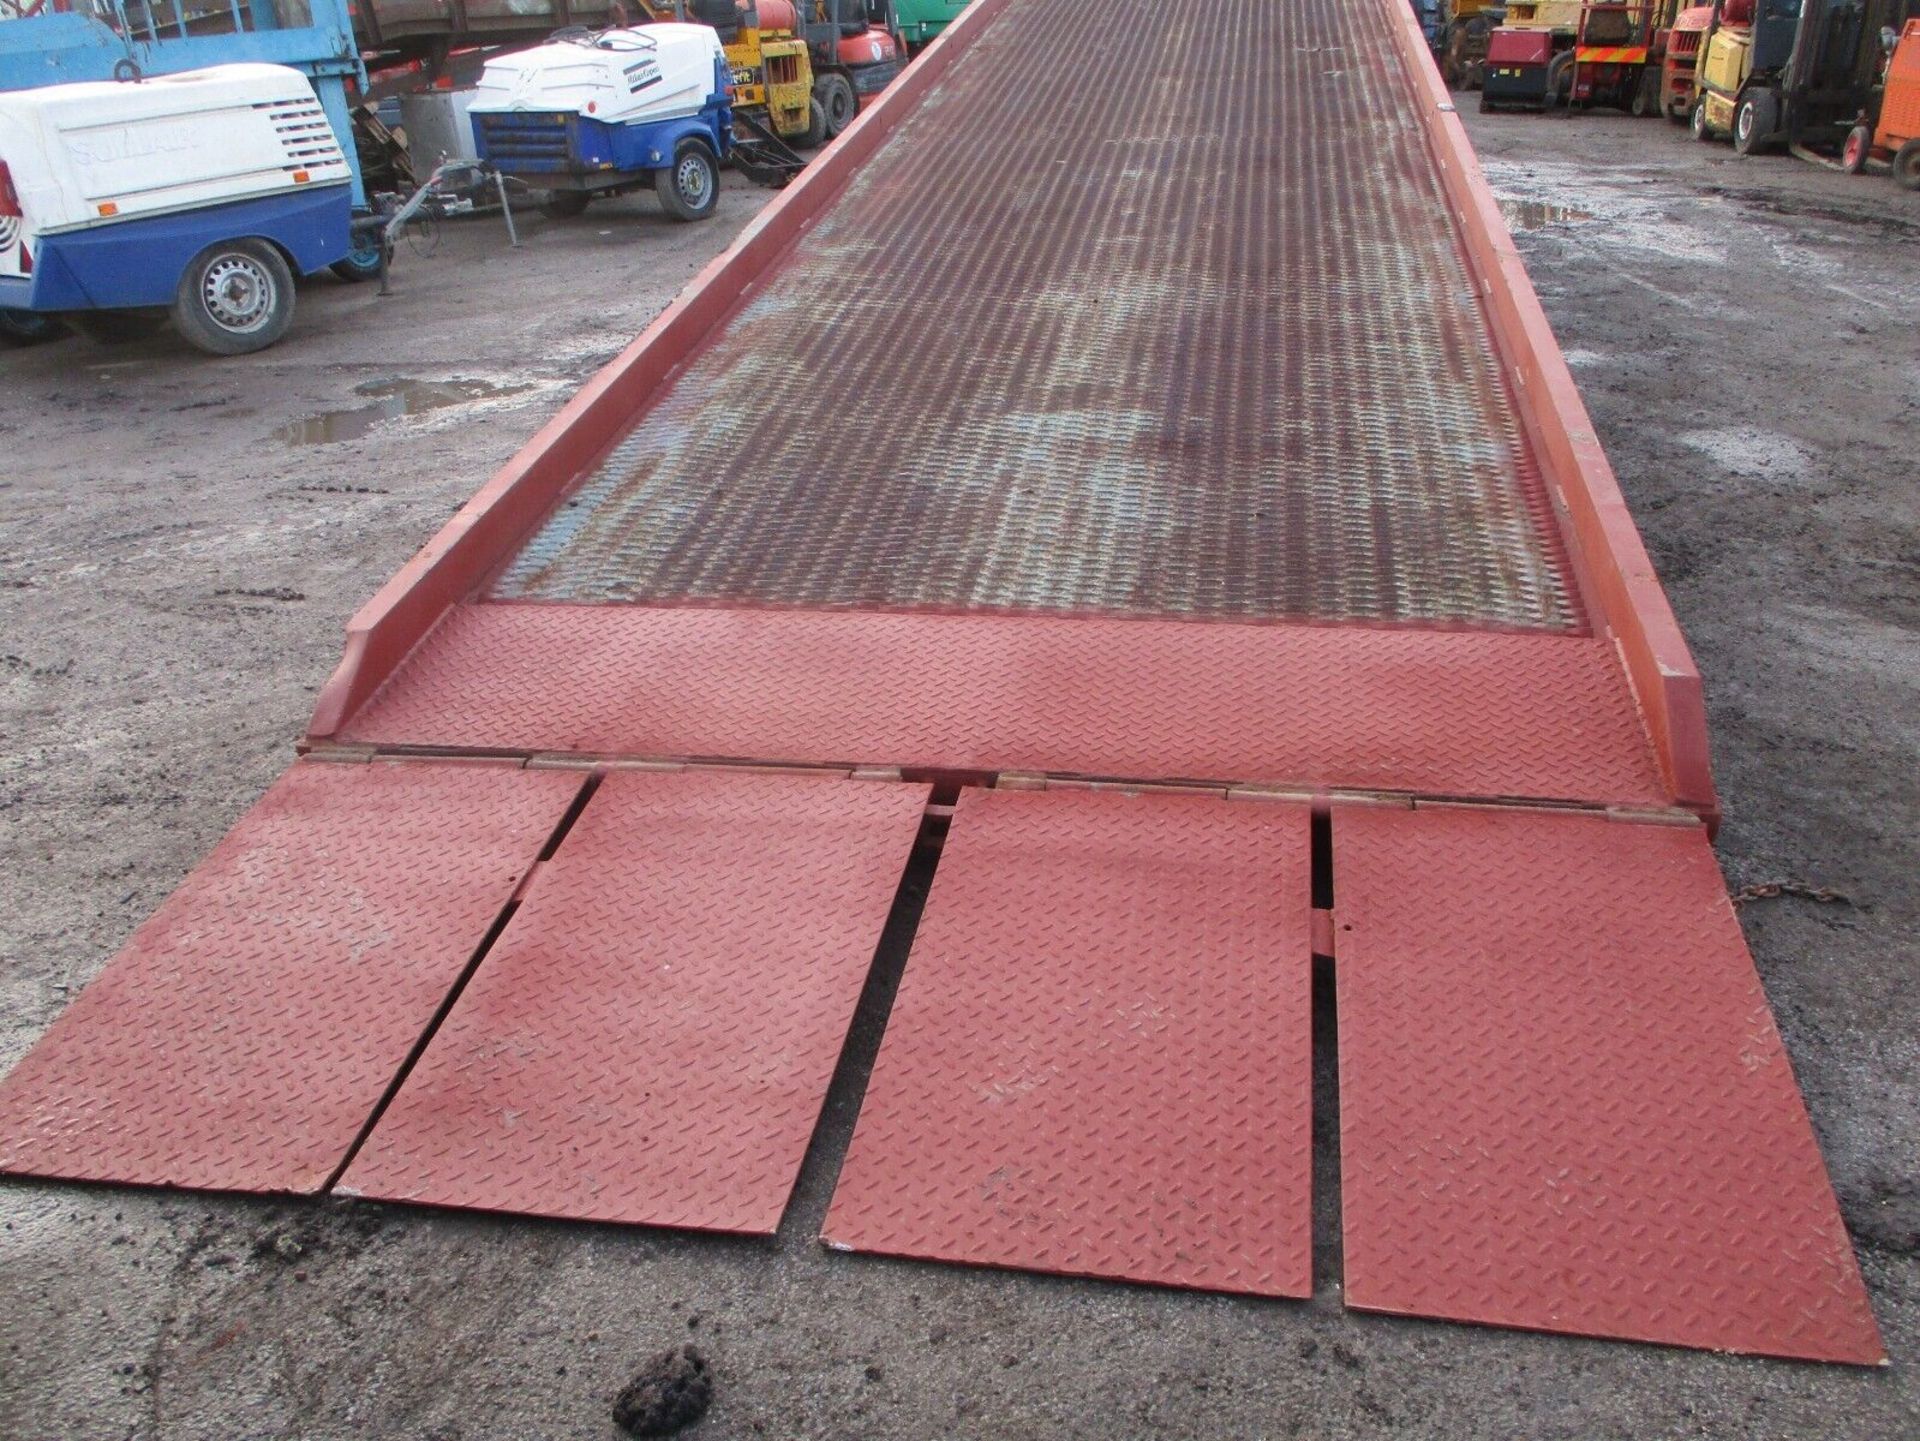 12 METRES LONG THORWORLD CONTAINER LOADING RAMP - Image 4 of 11